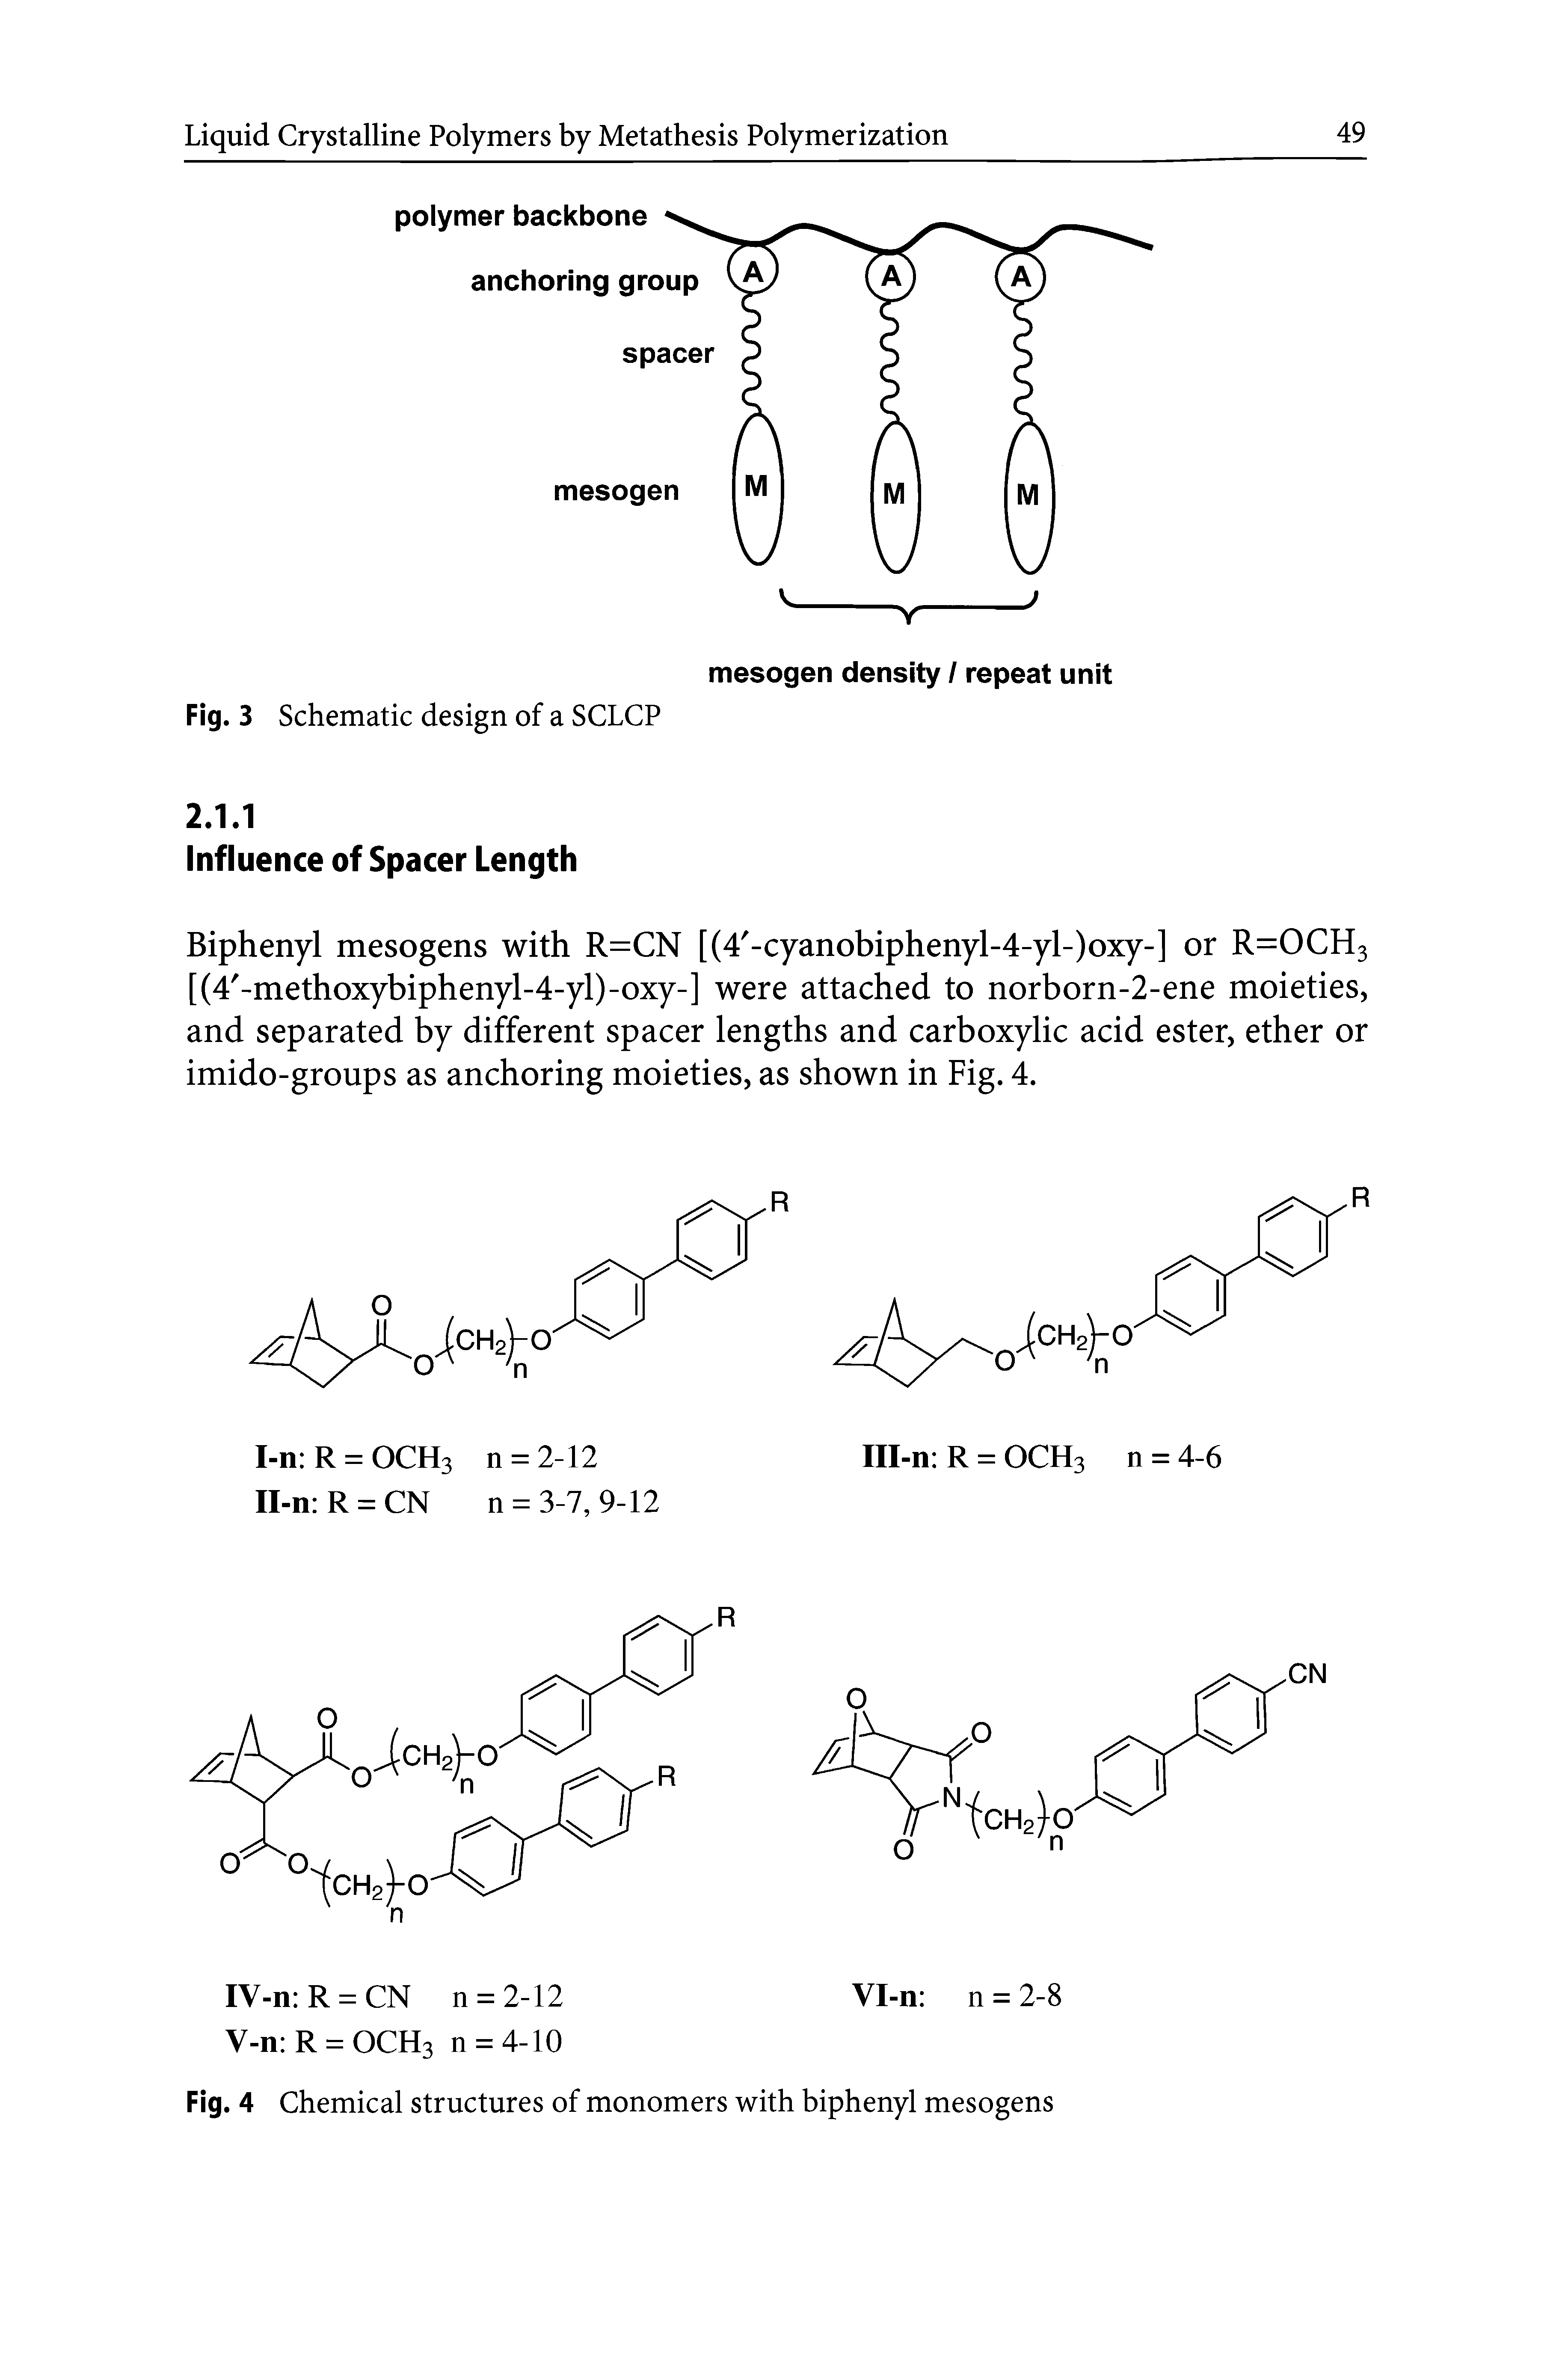 Fig. 4 Chemical structures of monomers with biphenyl mesogens...